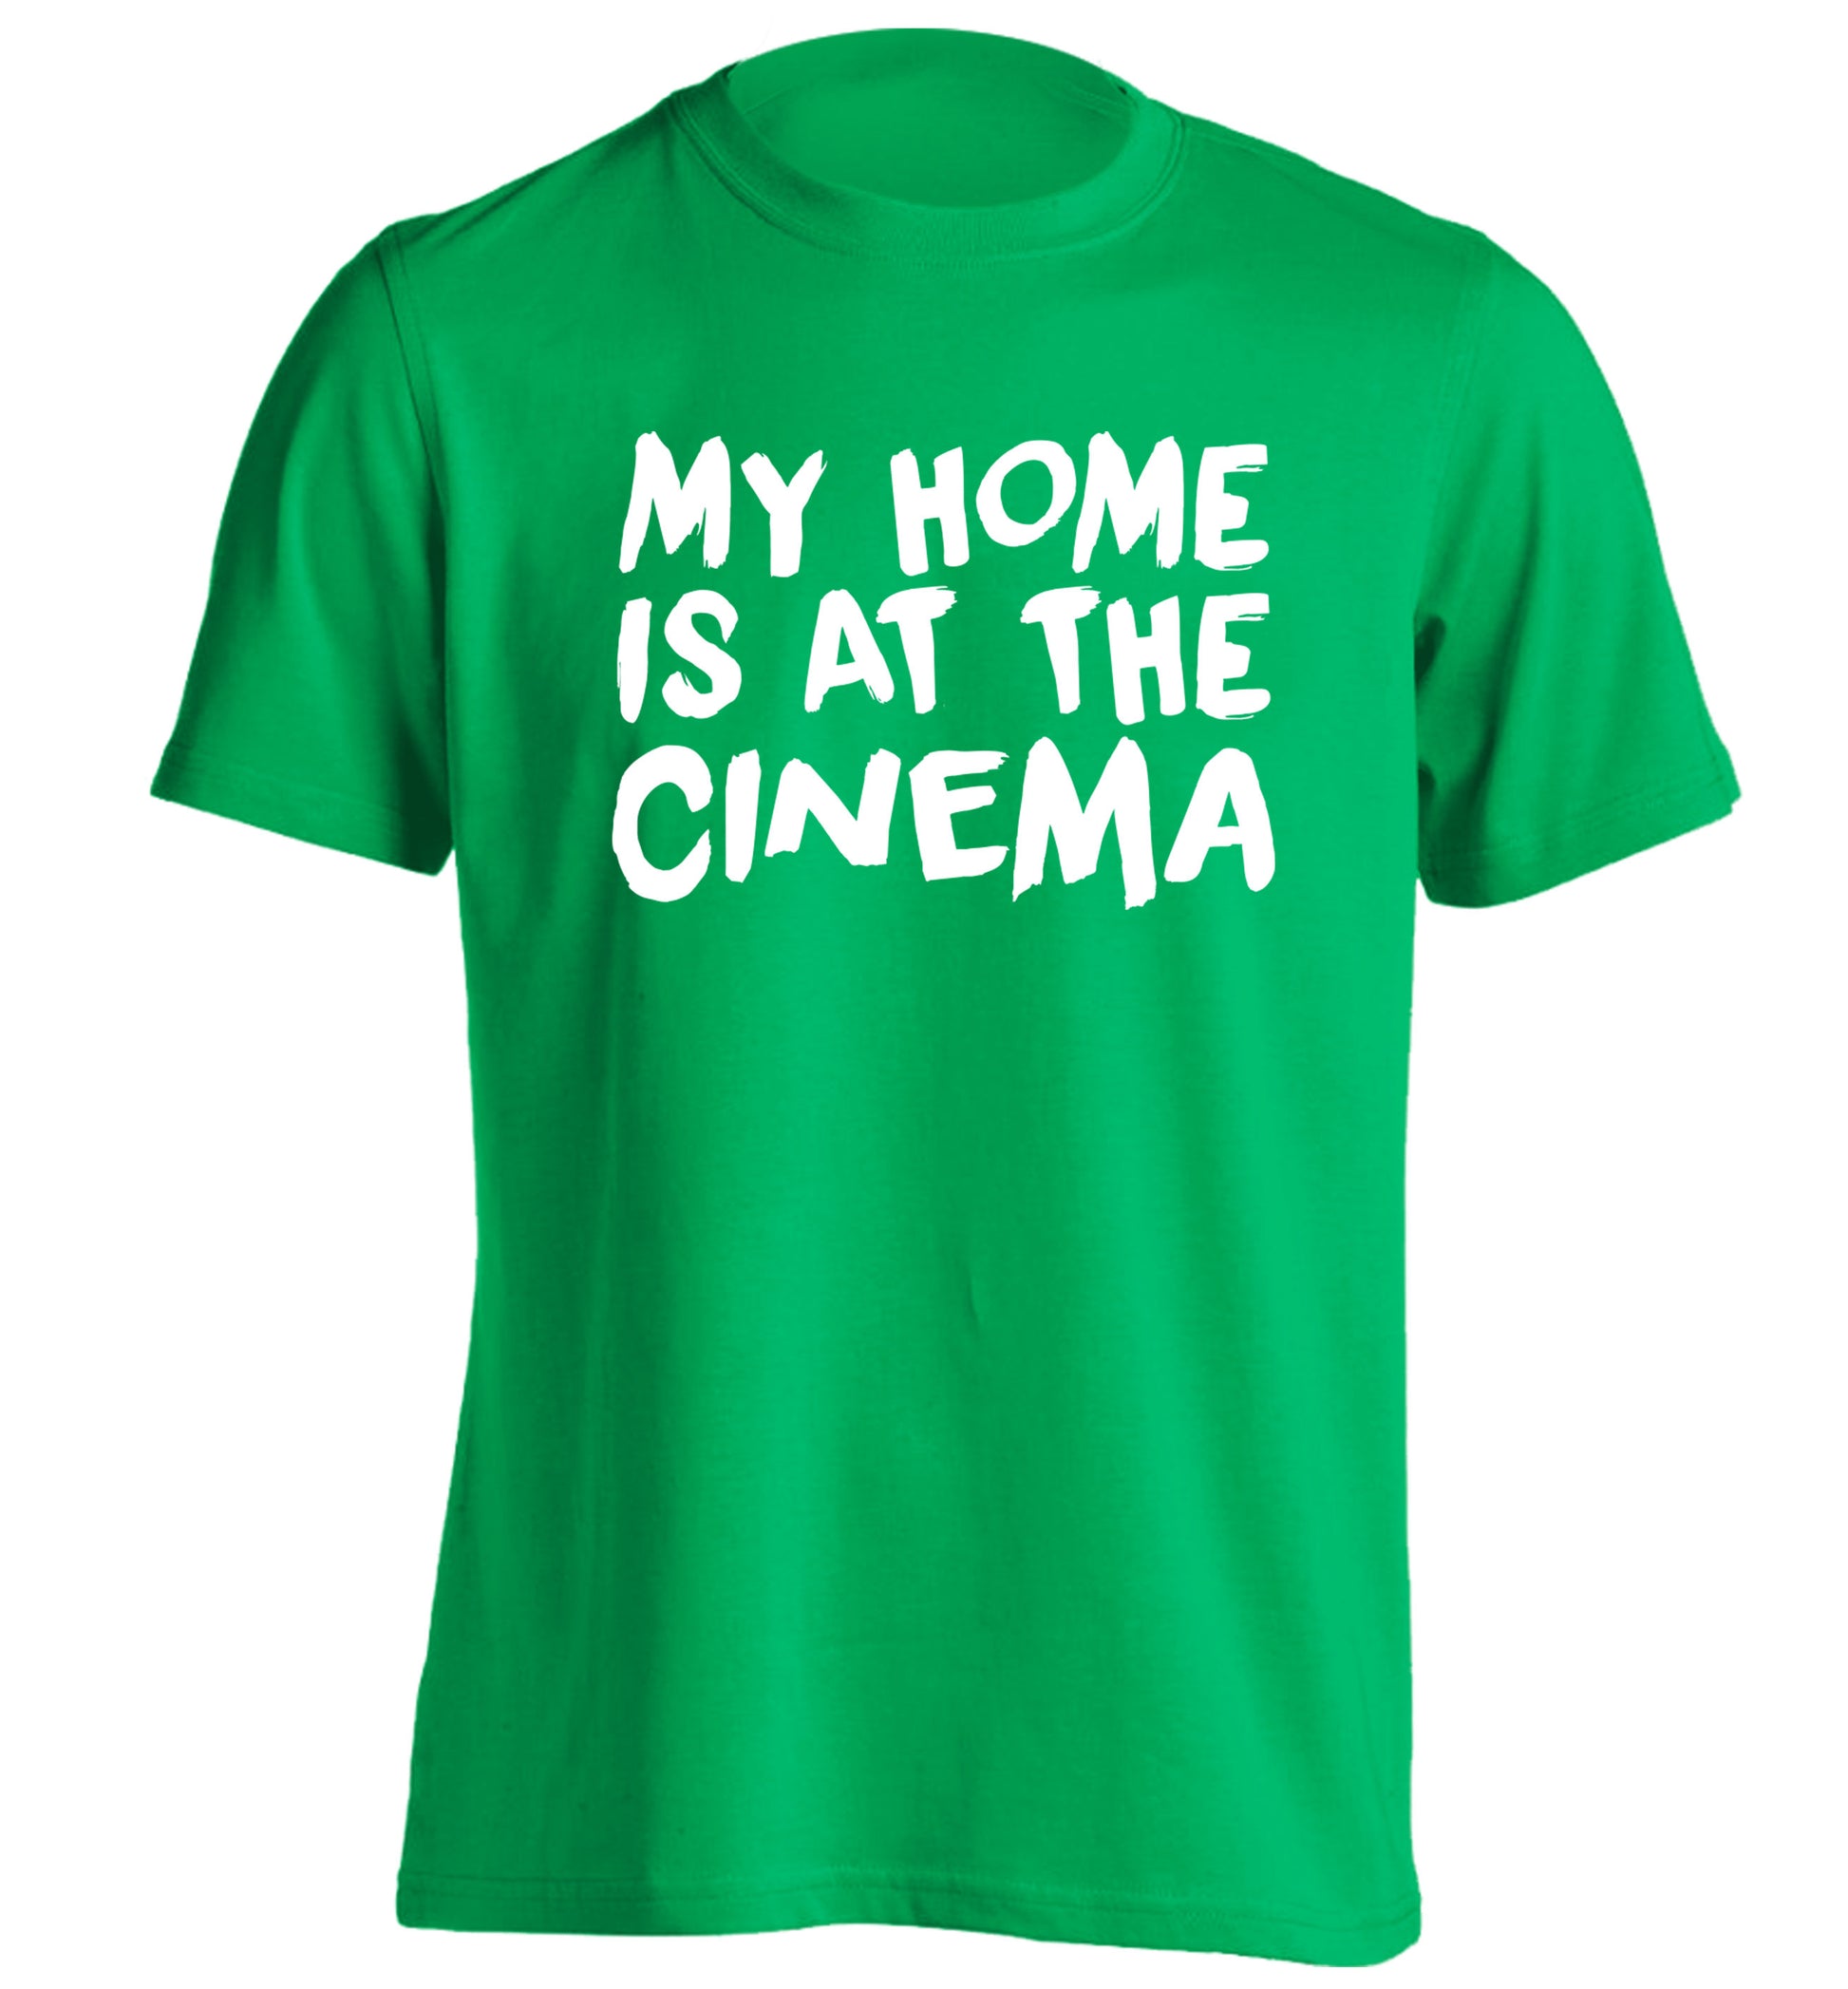 My home is at the cinema adults unisex green Tshirt 2XL